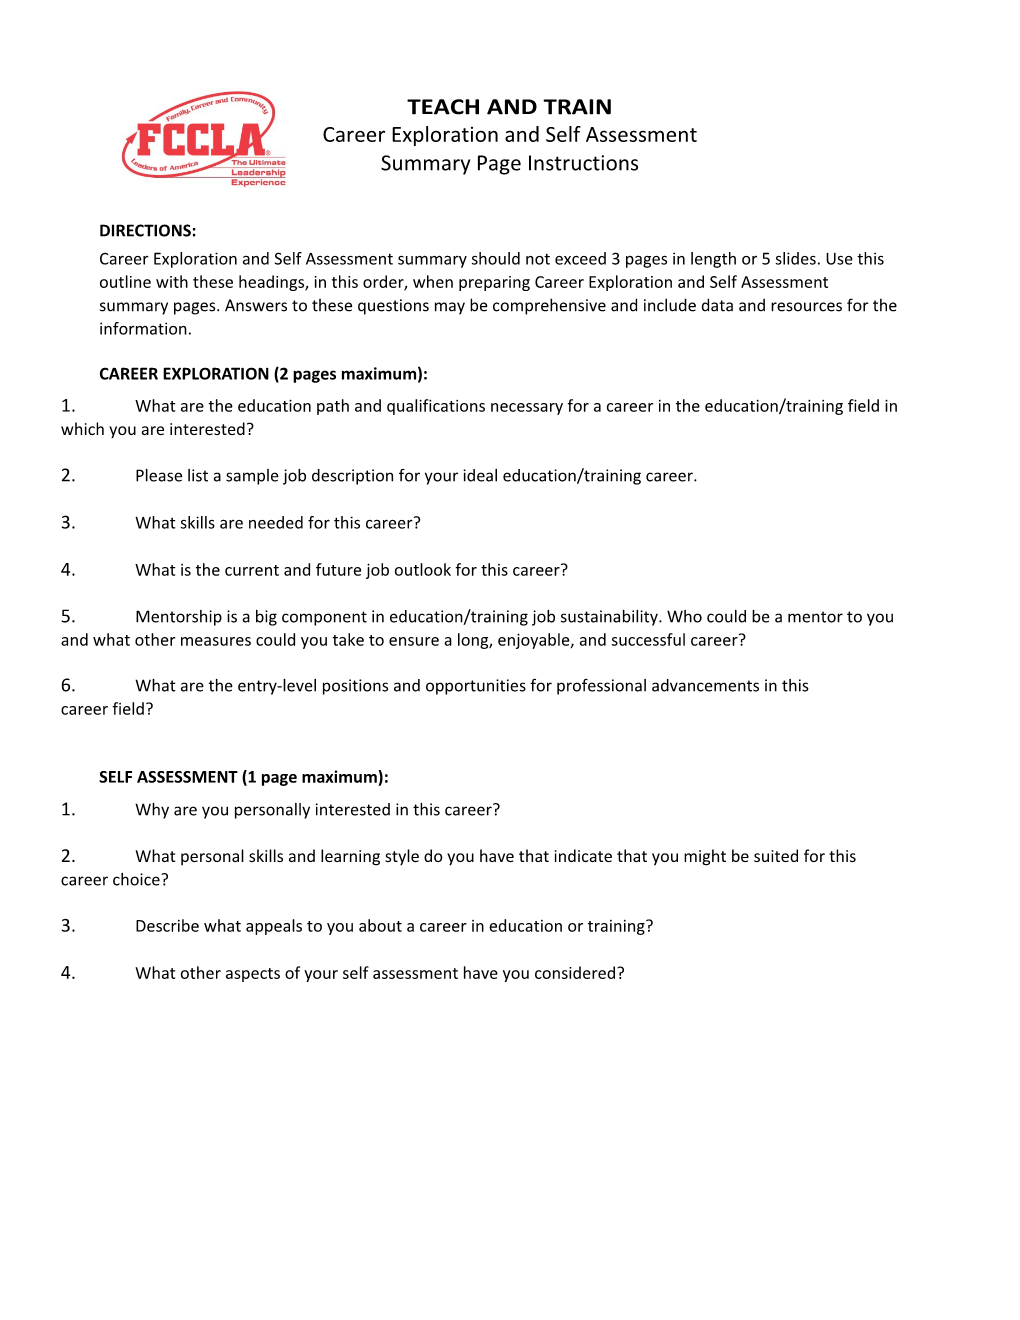 Career Exploration and Self Assessmentsummary Page Instructions